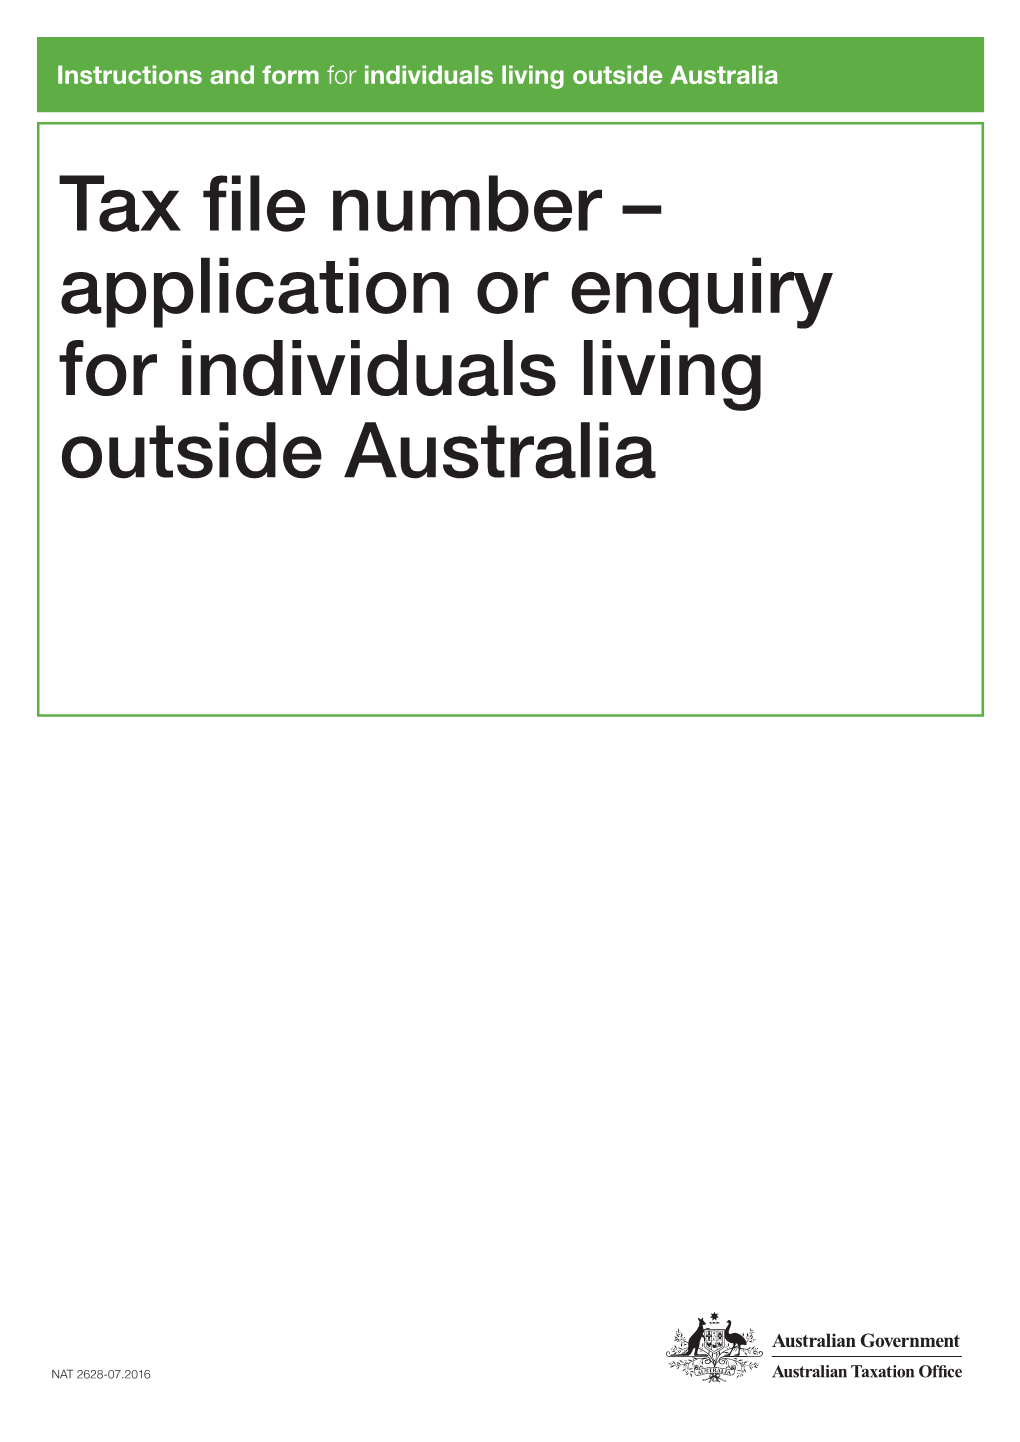 Tax File Number – Application Or Enquiry for Individuals Living Outside Australia